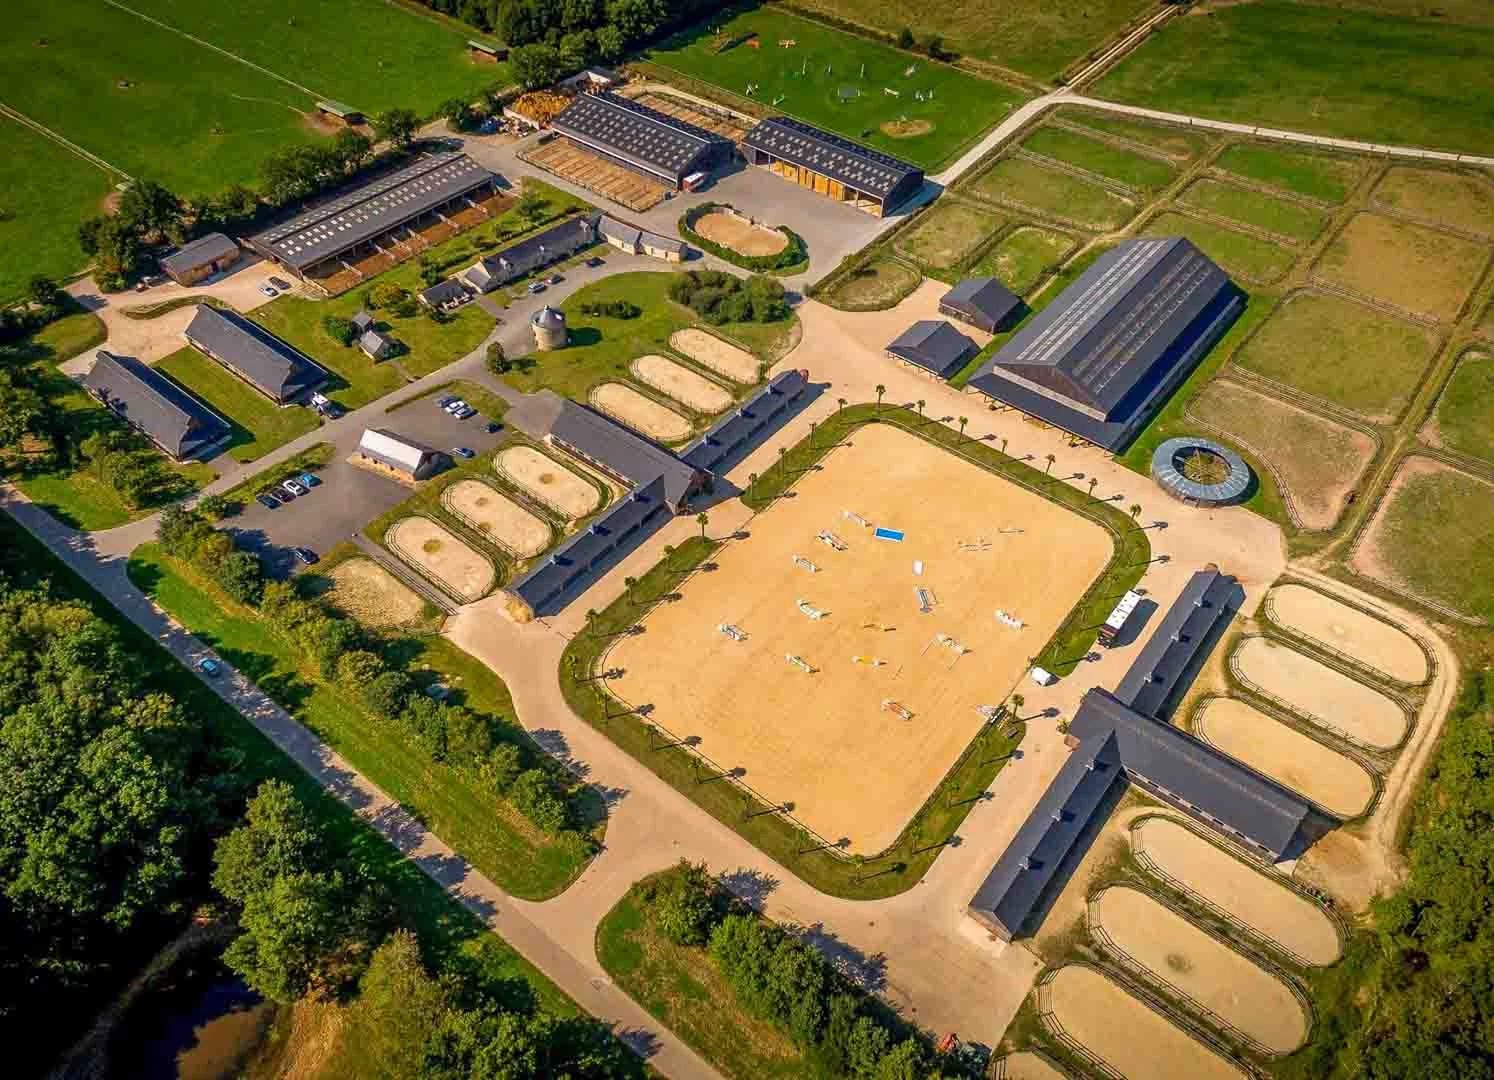 Birds eye view of French estate with equestrian facilities.